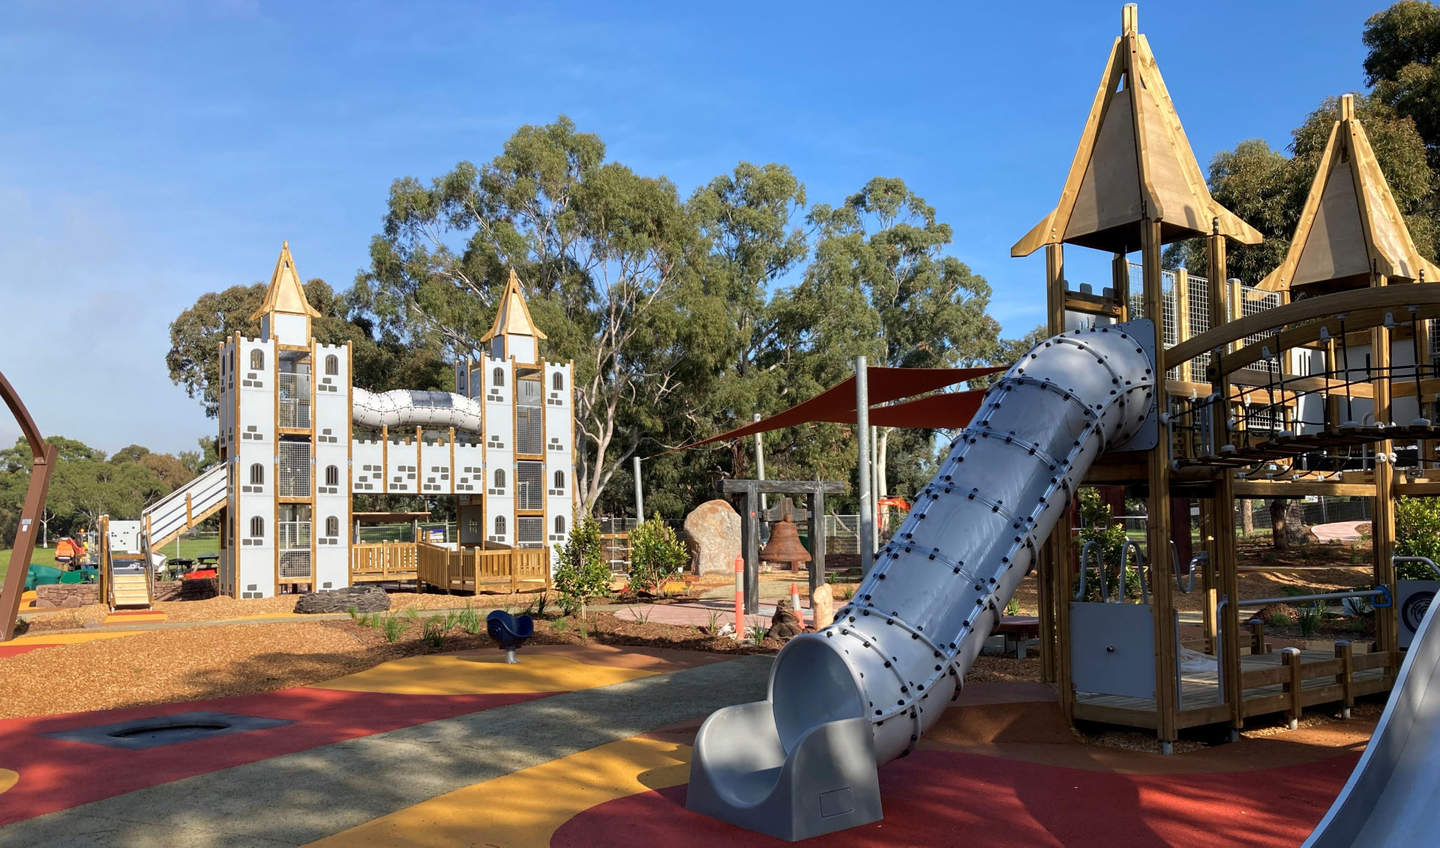 Thomas Street accessible playground: A place for everyone to play